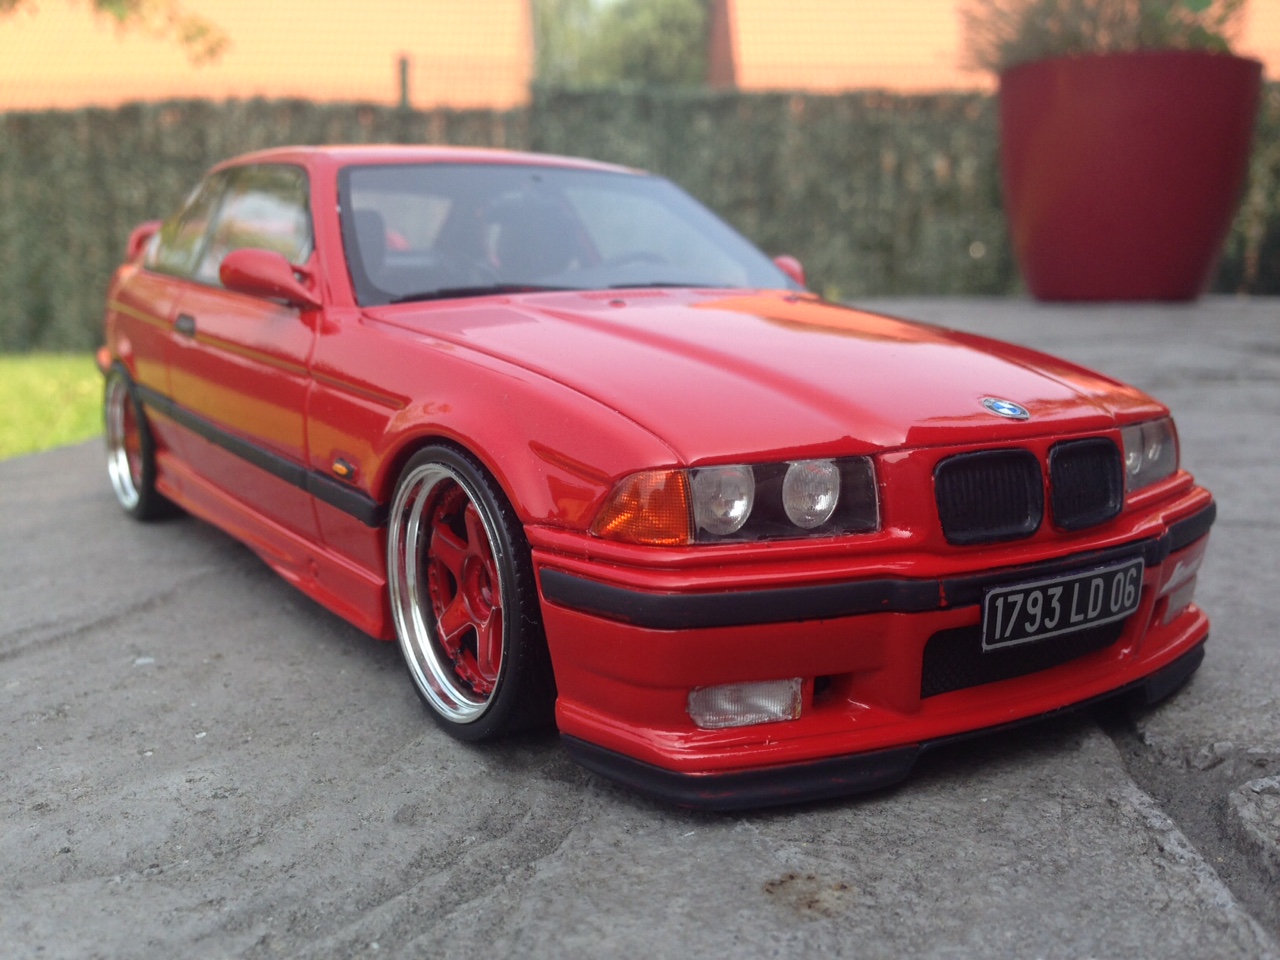 Bmw M3 E36 1/18 Ottomobile E36 Light Weight red tuning diecast model cars